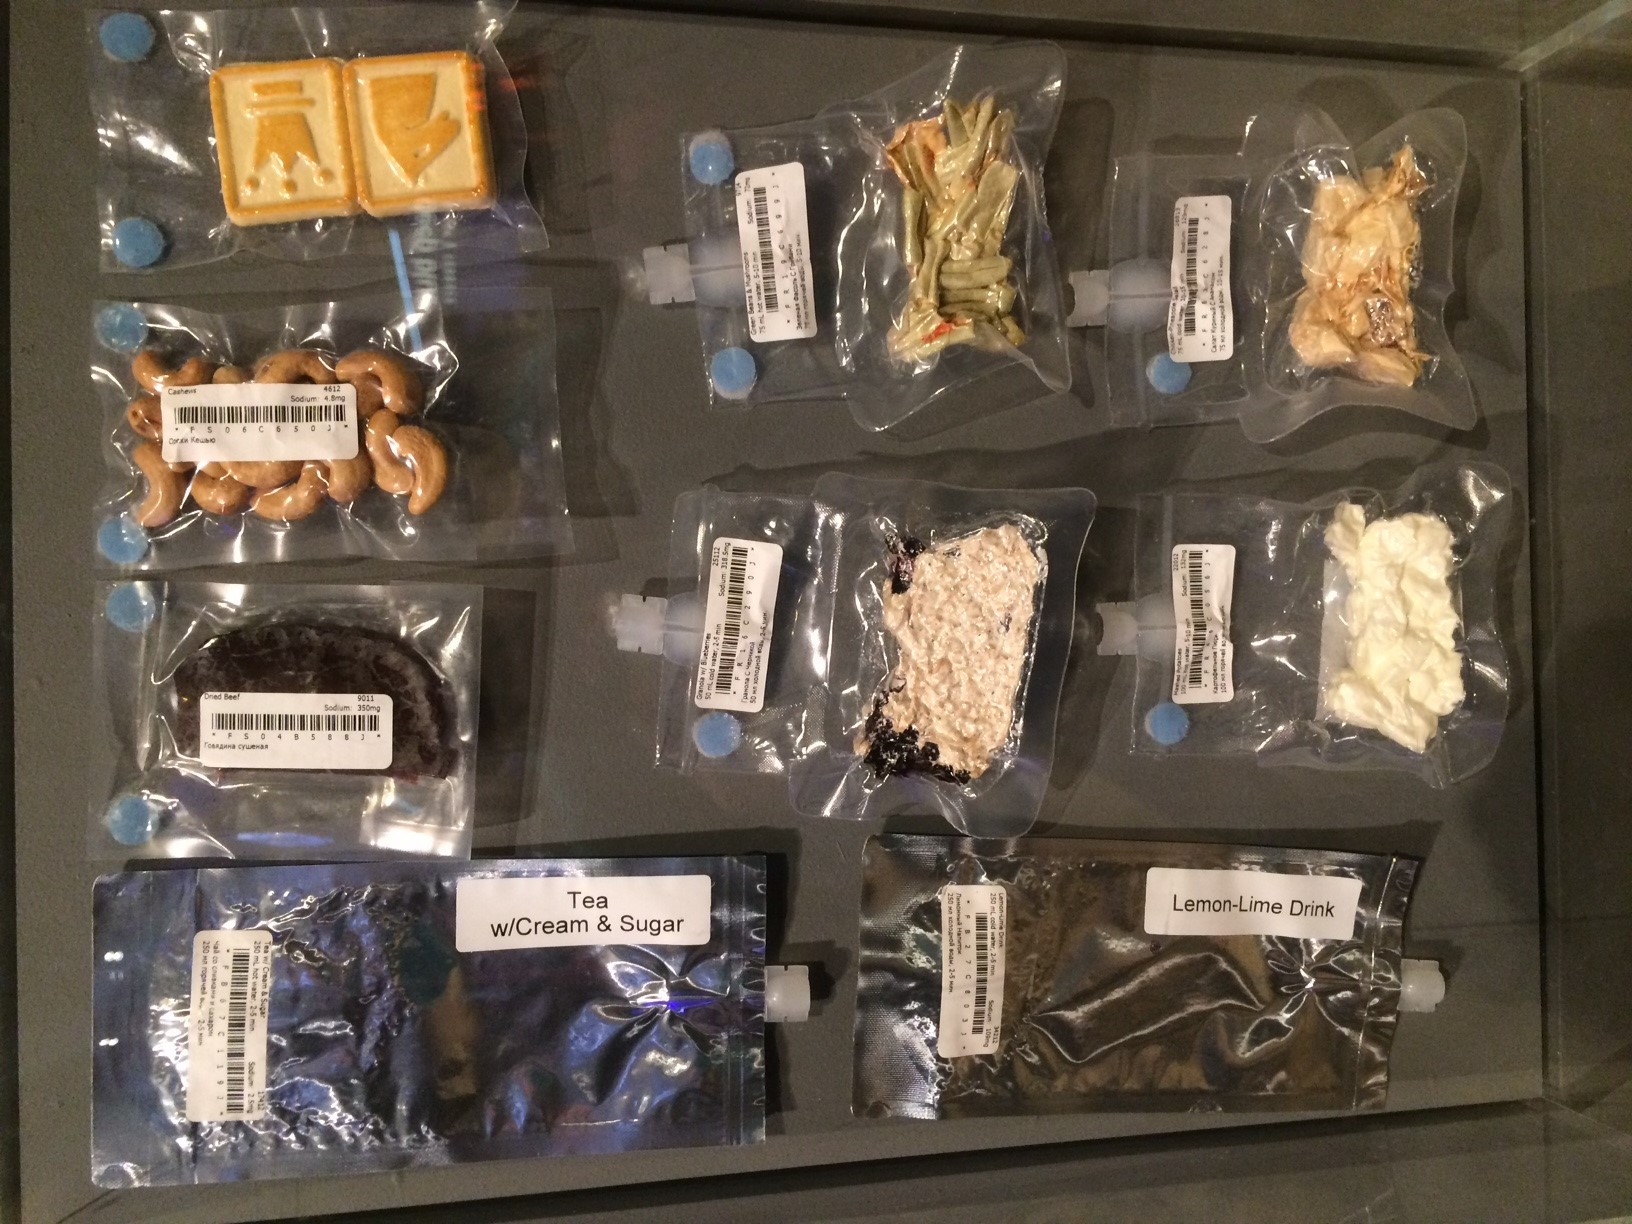 Vacuum-packed portions of food, drink and snacks that astronauts eat in space are laid out on a table.